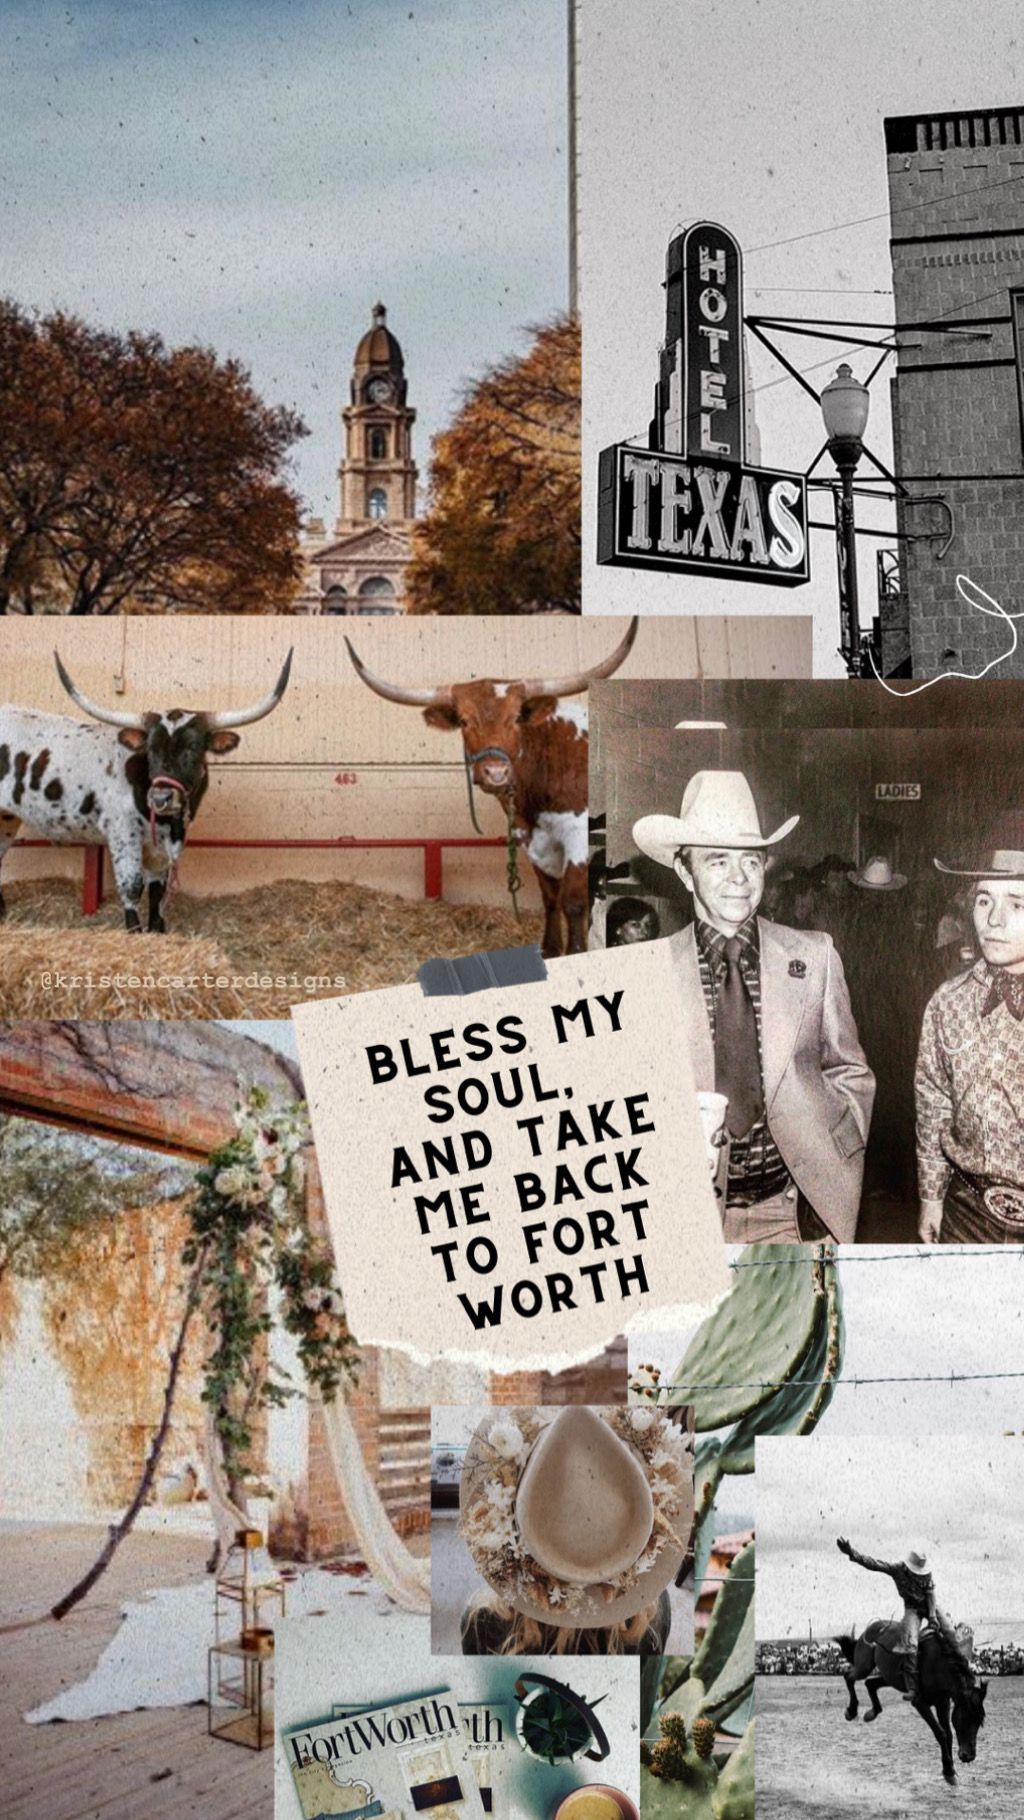 A collage of images of Fort Worth, Texas including a cow, a cowboy, a hotel sign, and a rodeo. - Texas